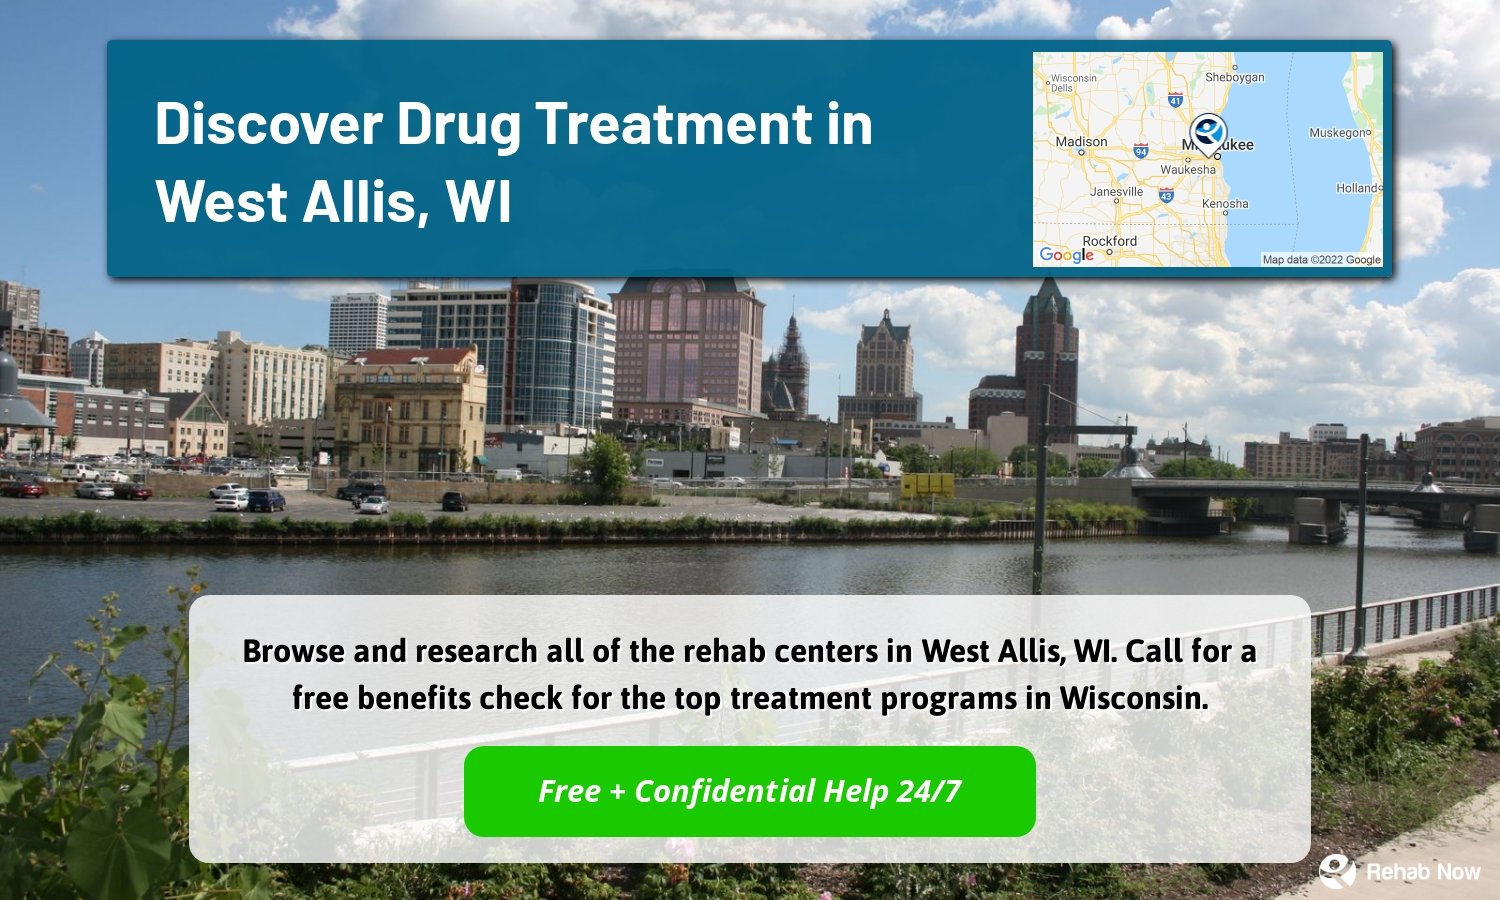 Browse and research all of the rehab centers in West Allis, WI. Call for a free benefits check for the top treatment programs in Wisconsin.